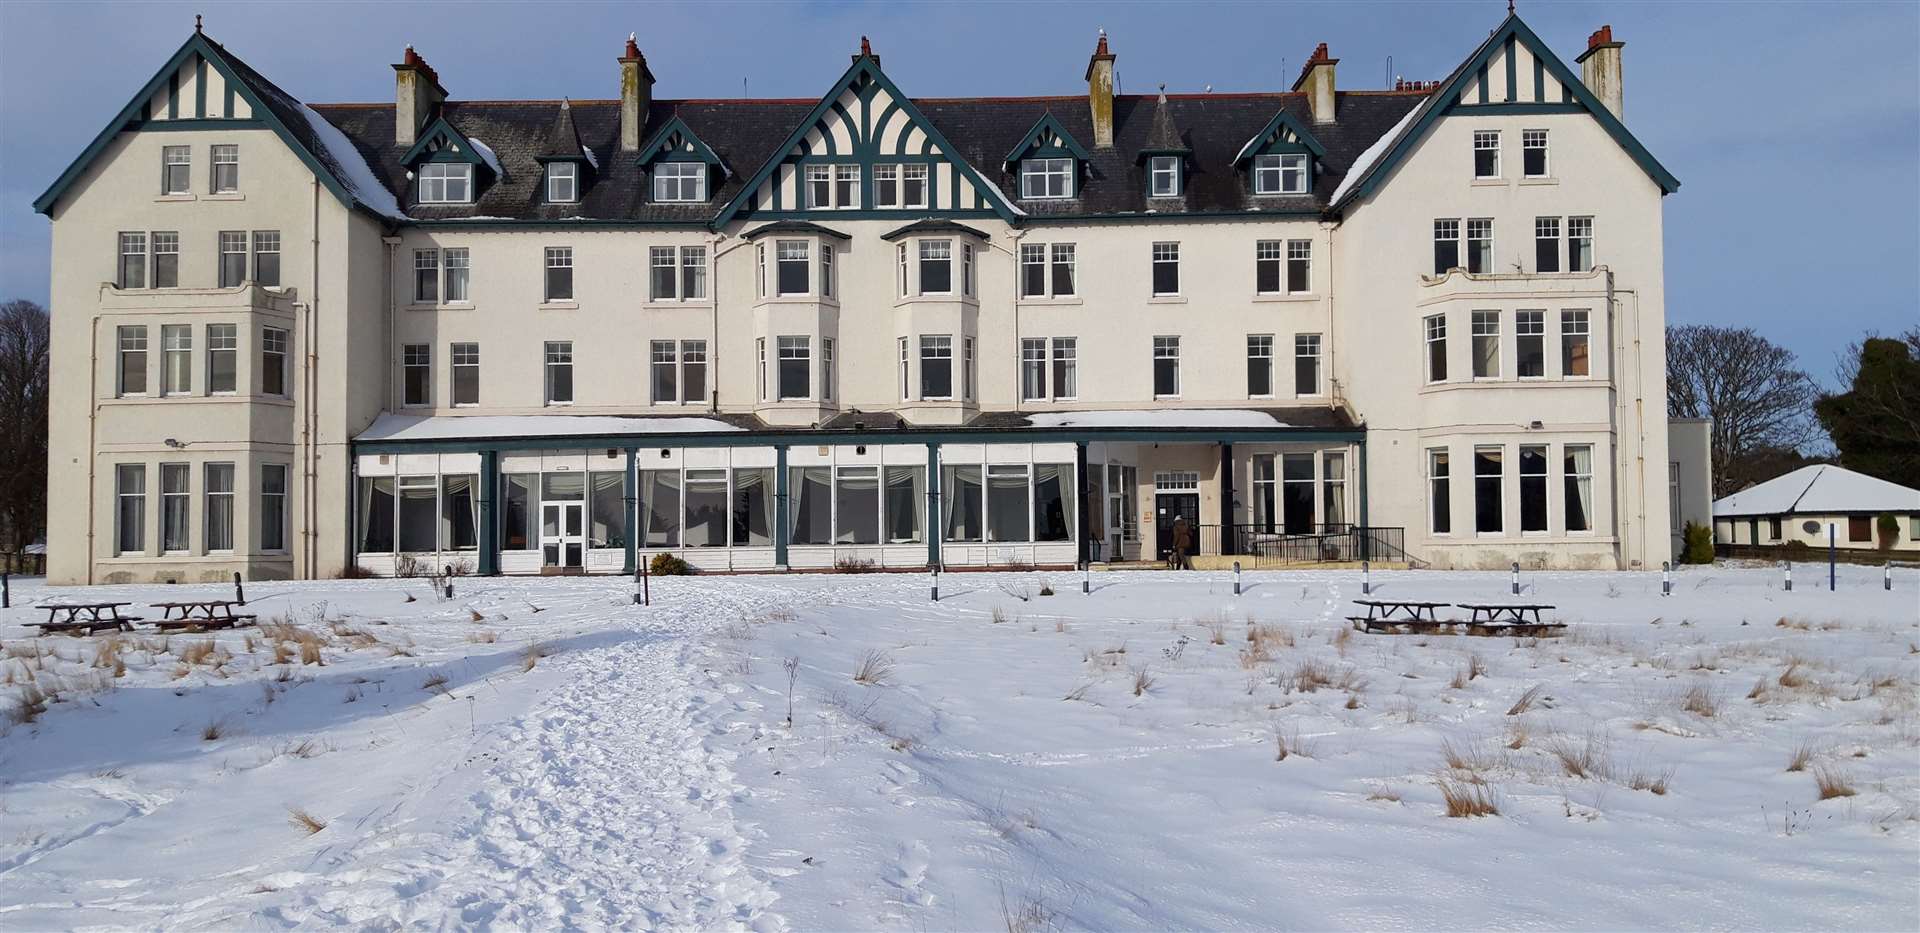 The Dornoch Hotel is currently closed for extensive renovations.